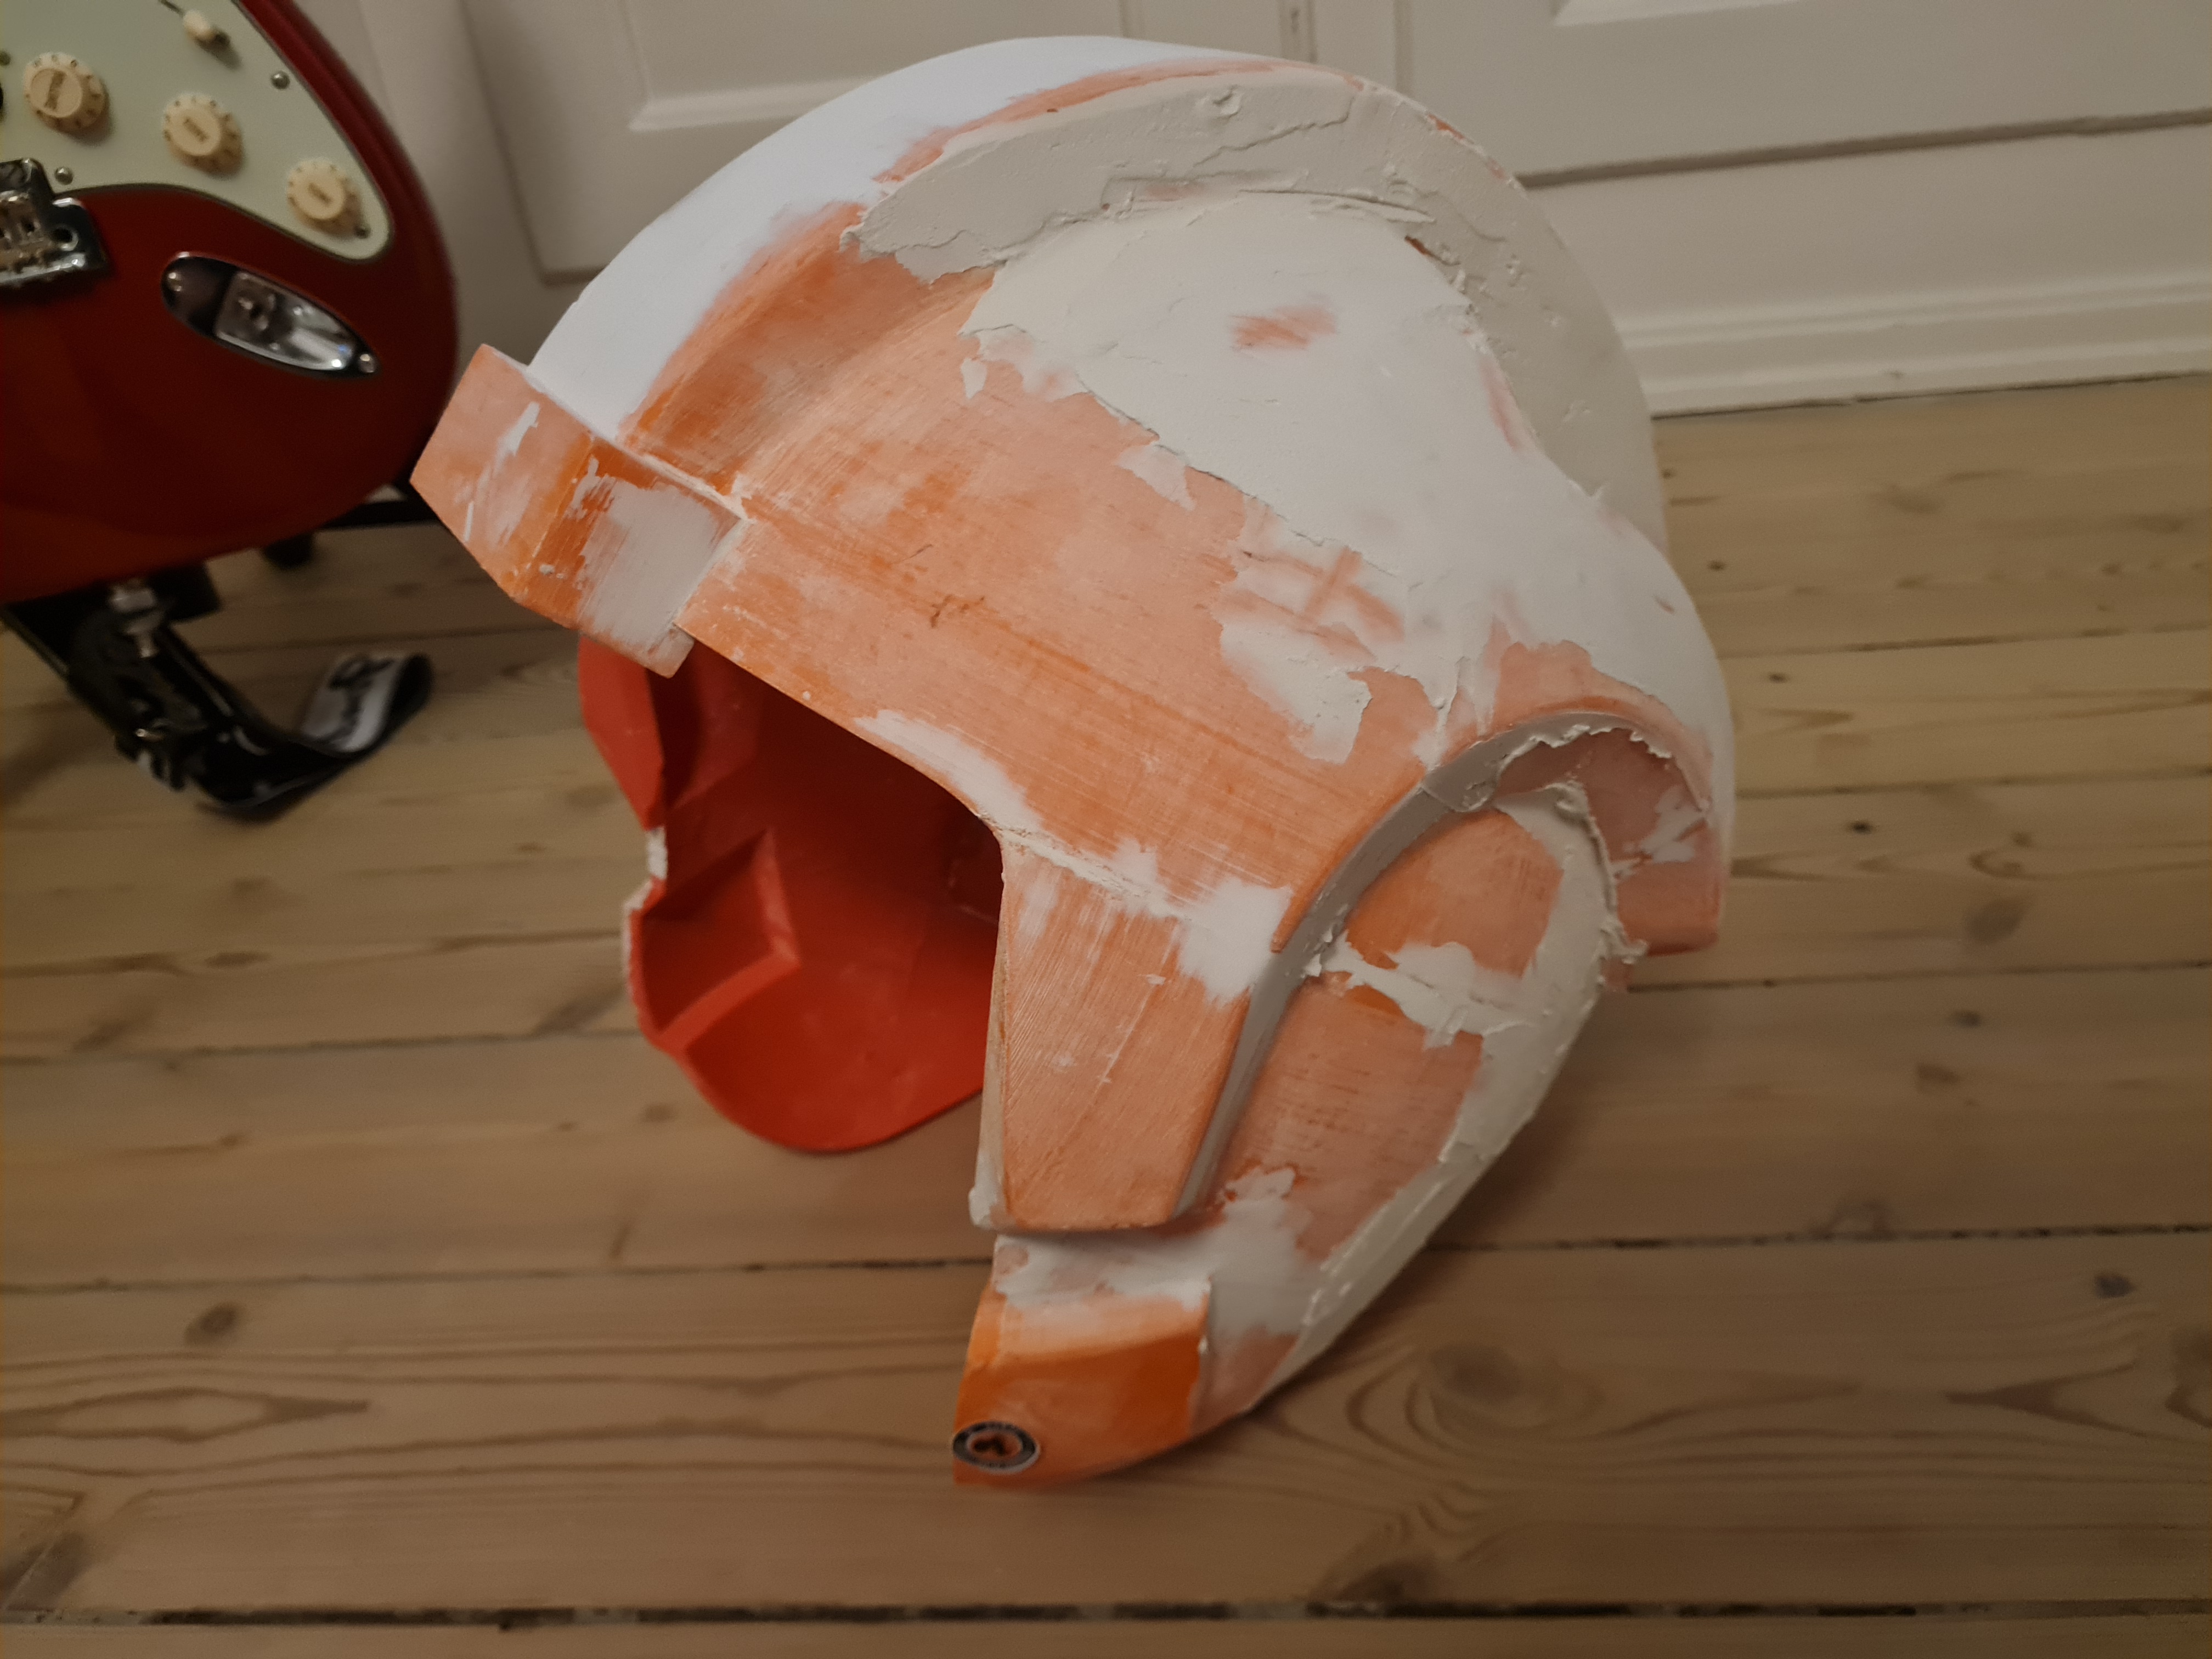 X-wing helmet remixed to fit a smaller printer from the original trilogy